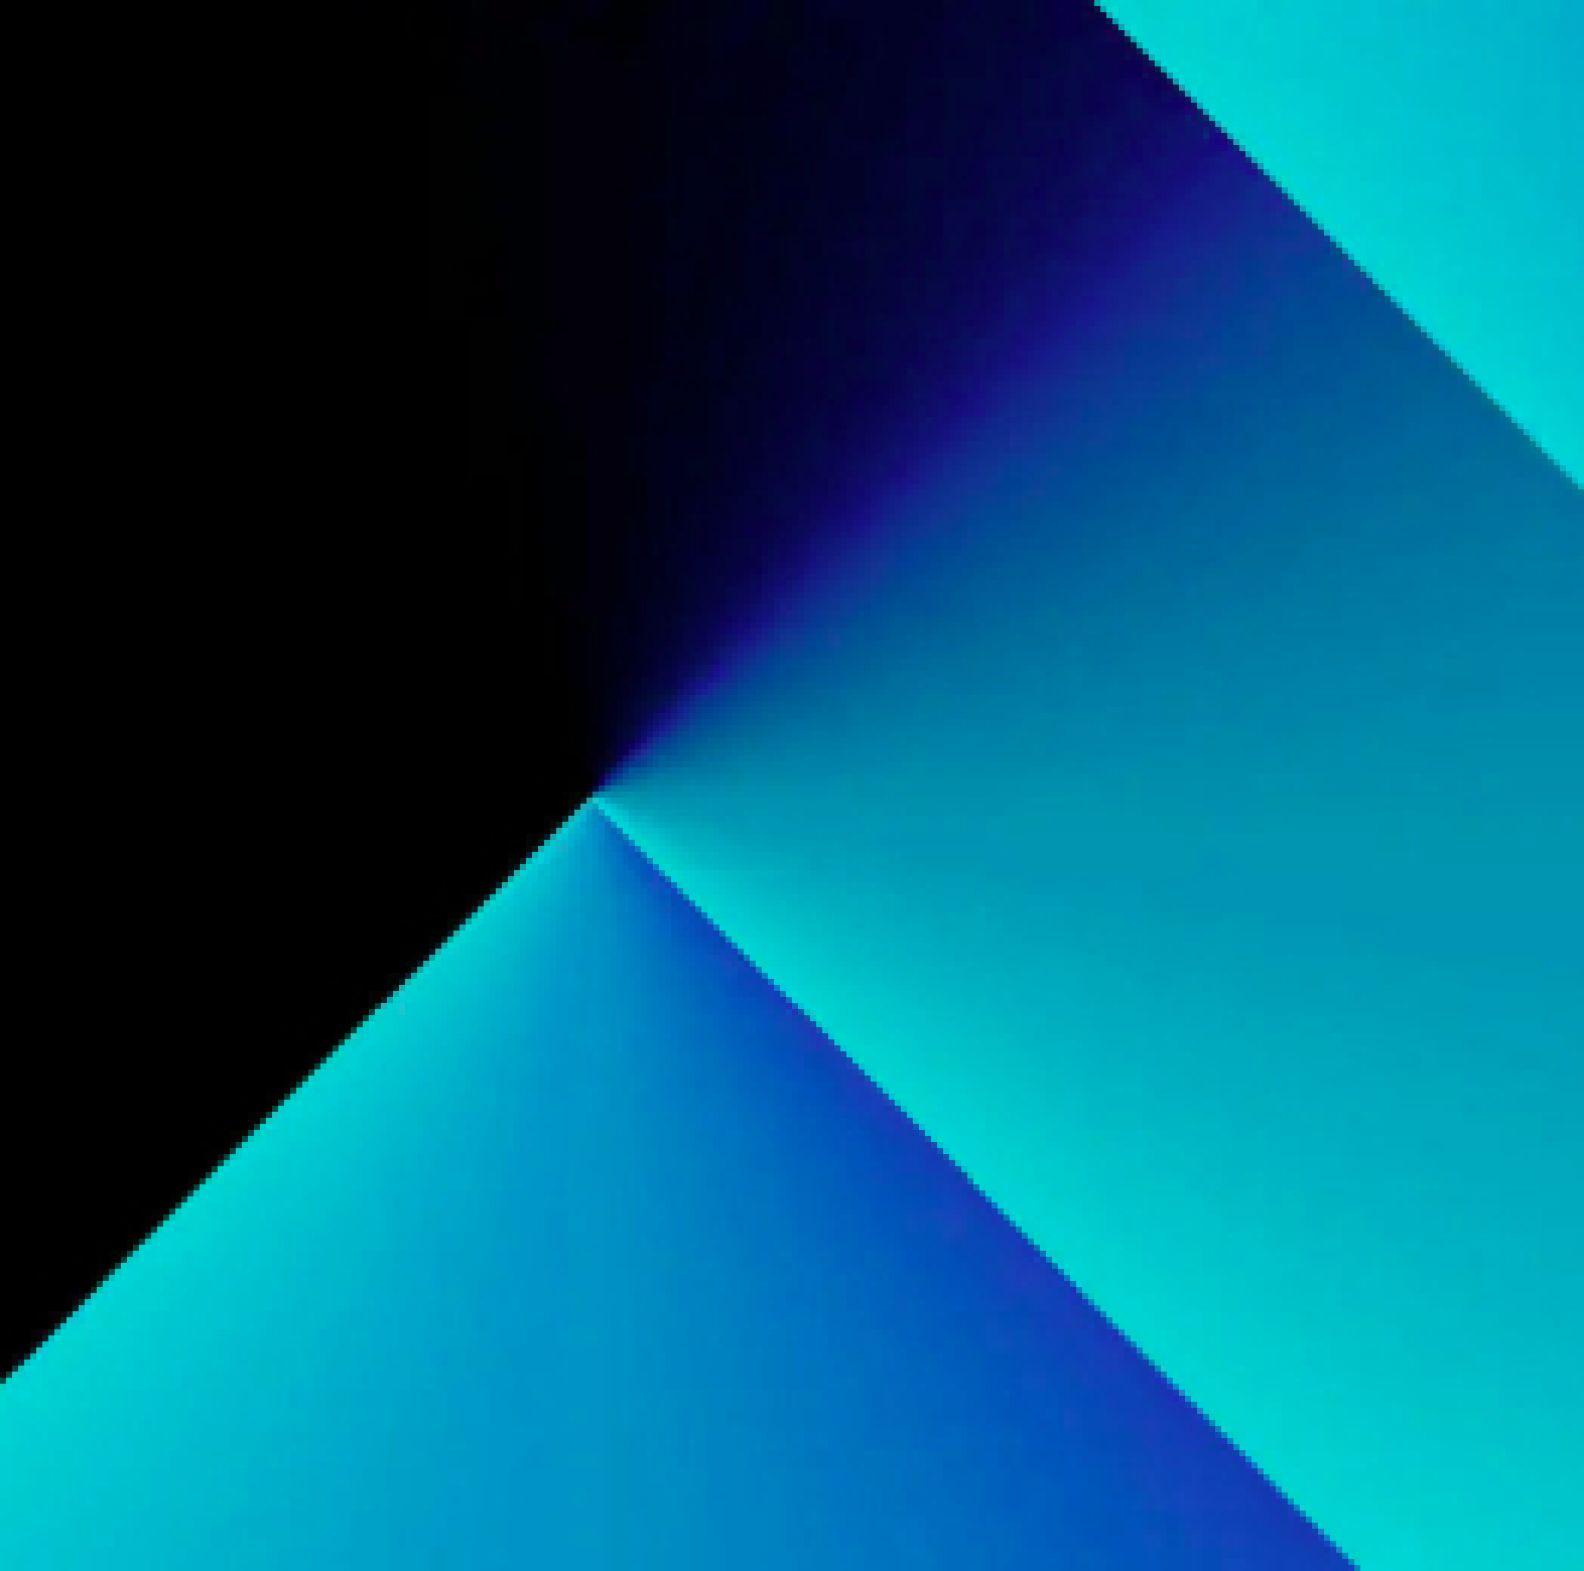 Black background with blue green design